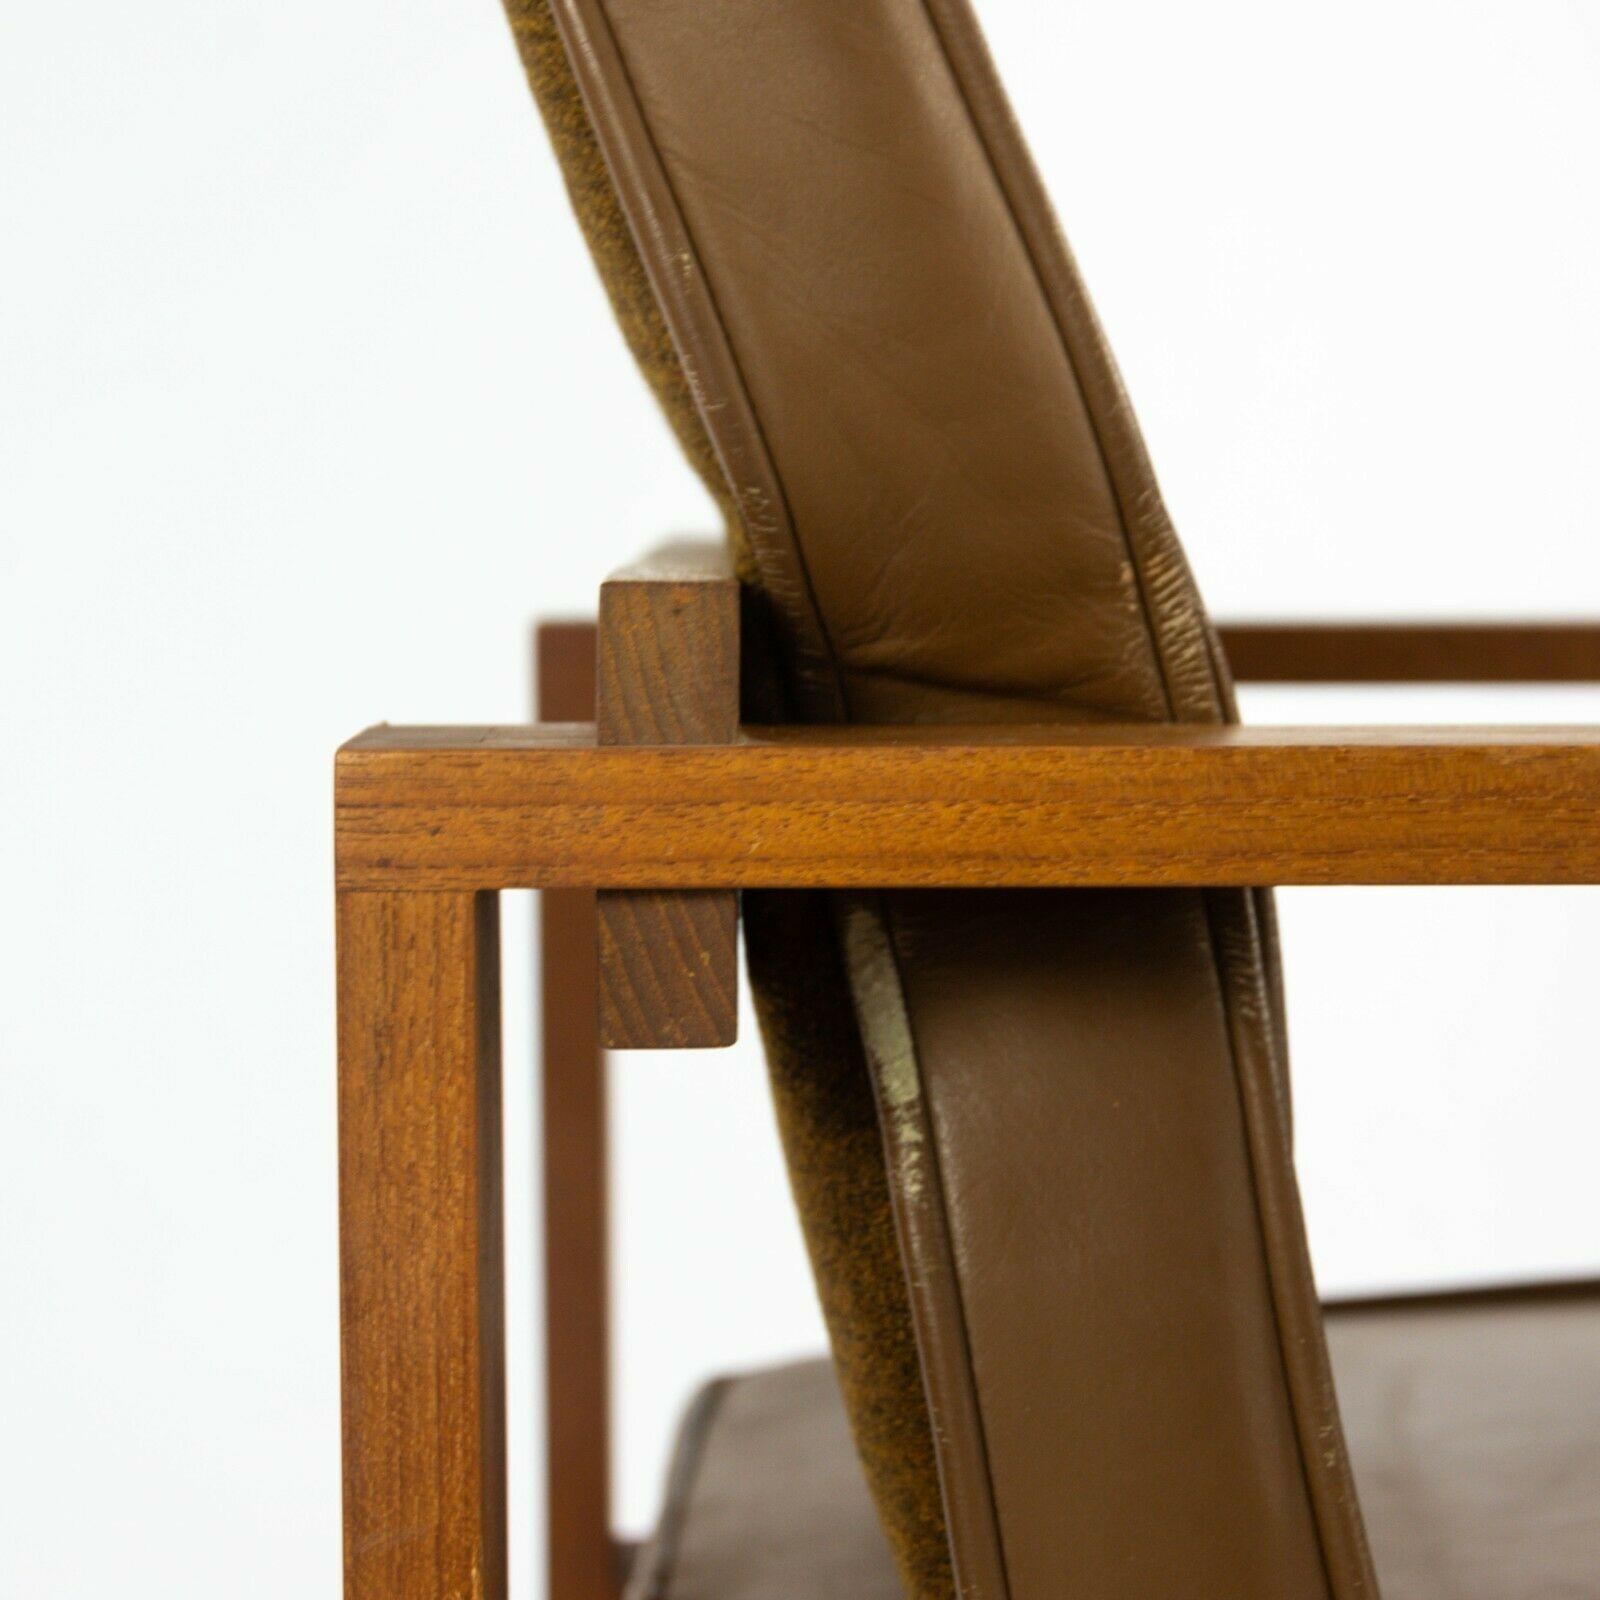 1975 Pair of Bodil Kjaer Teak & Leather Slat Seat Chairs by CI Designs of Boston For Sale 6